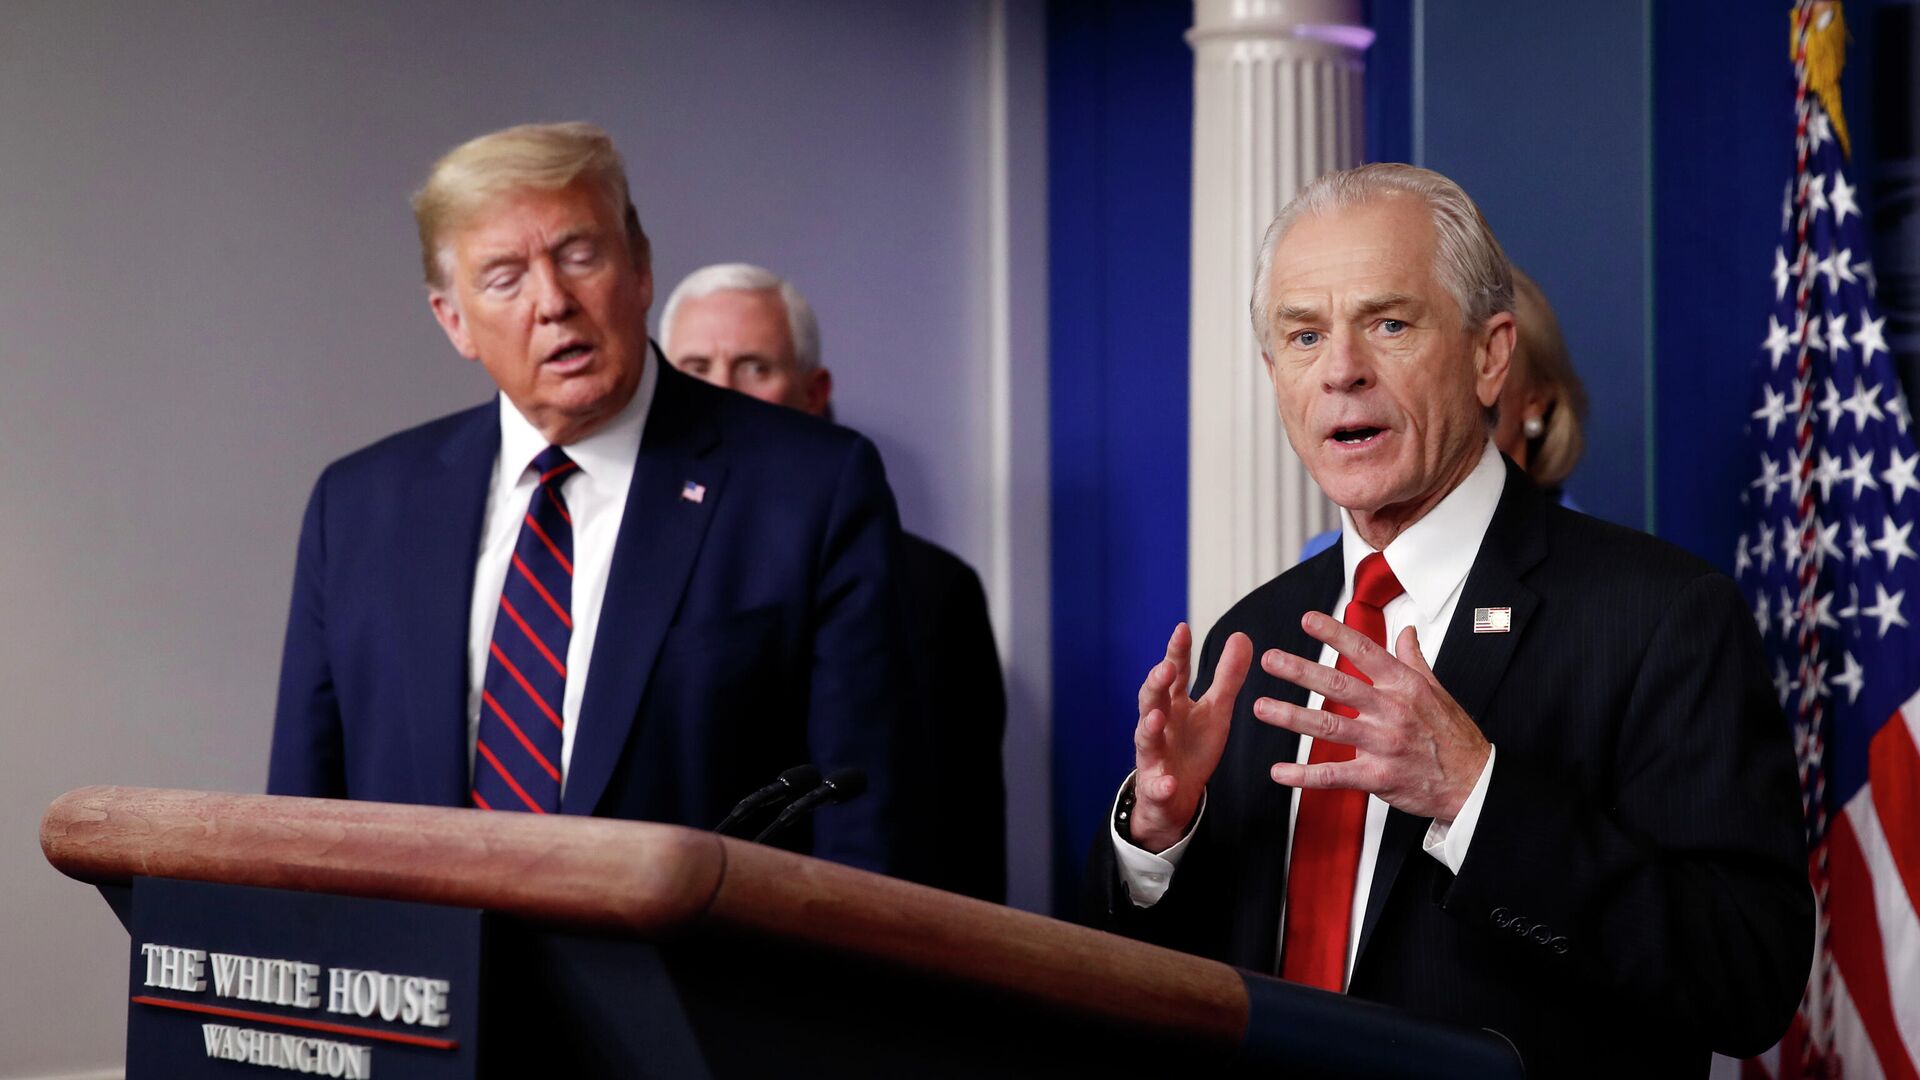 In this Friday, March 27, 2020 file photo, White House adviser Peter Navarro speaks about the coronavirus in the James Brady Press Briefing Room in Washington, as President Donald Trump listens. - Sputnik International, 1920, 21.11.2021